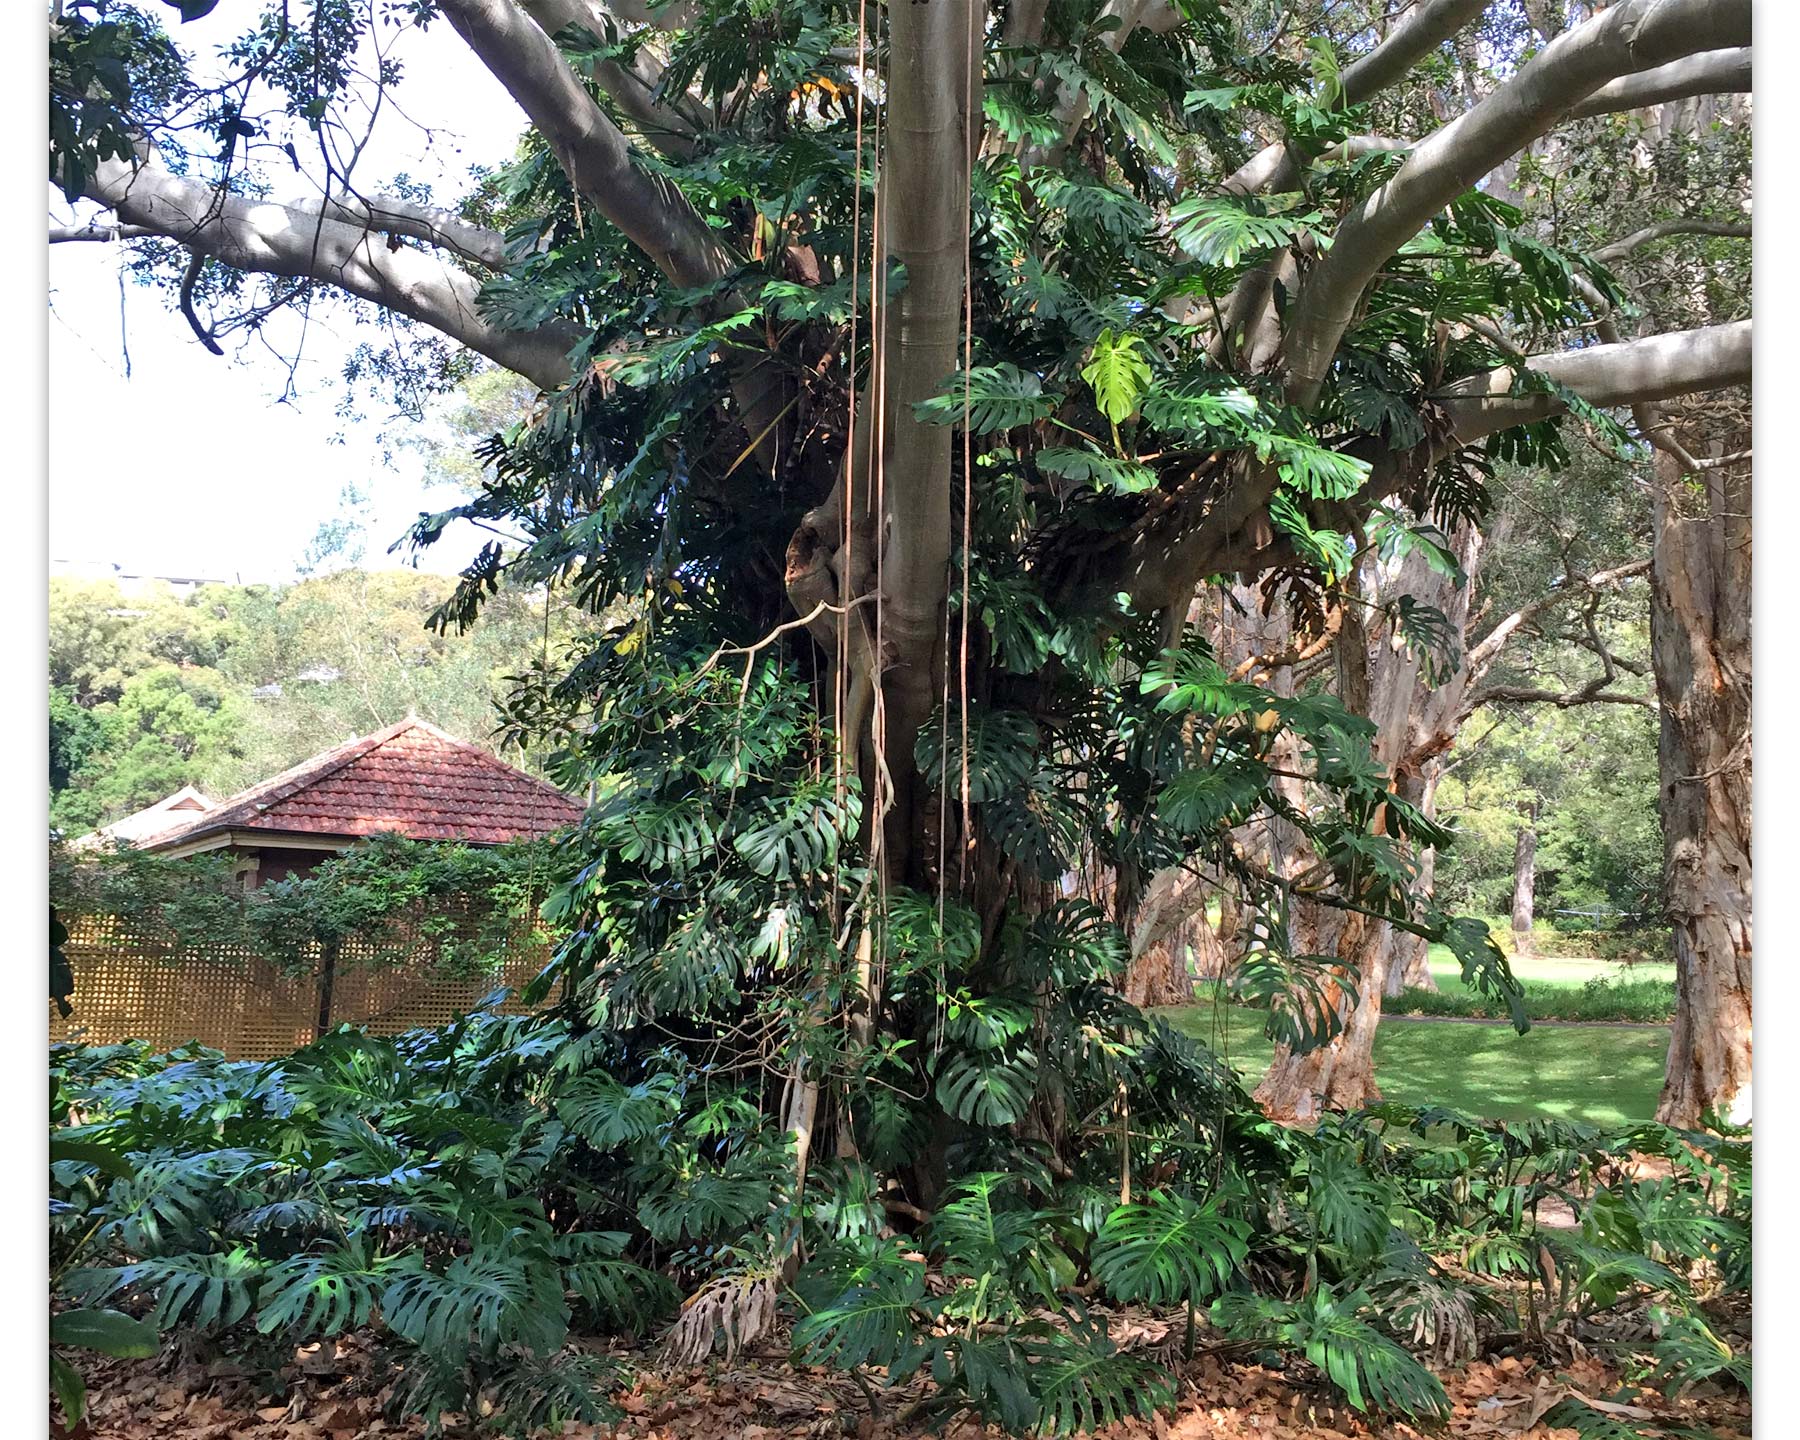 Monstera deliciosa, Swiss Cheese Plant that has bolted up a tree